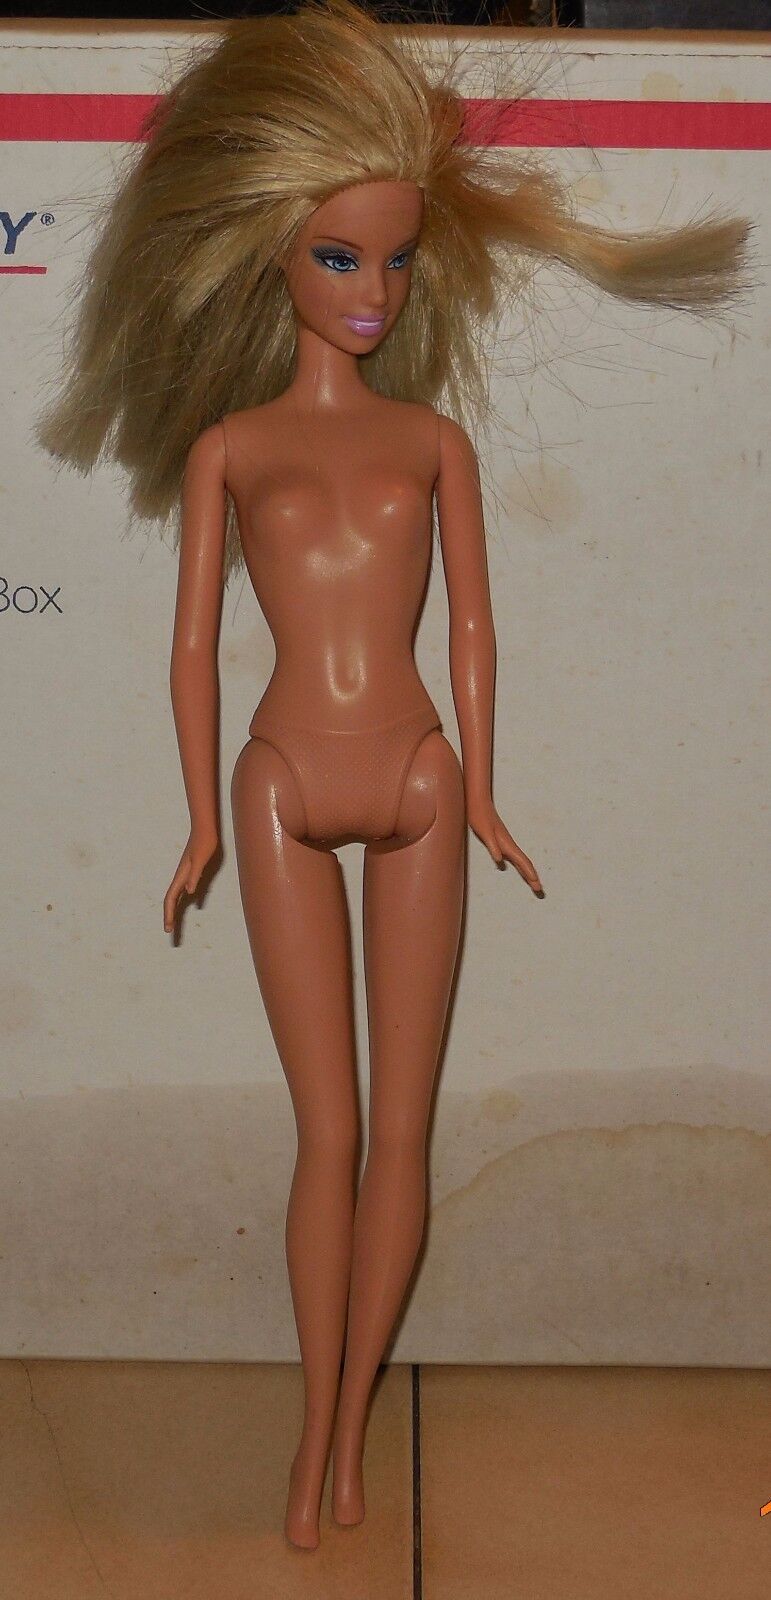 Primary image for Mattel Barbie doll #35